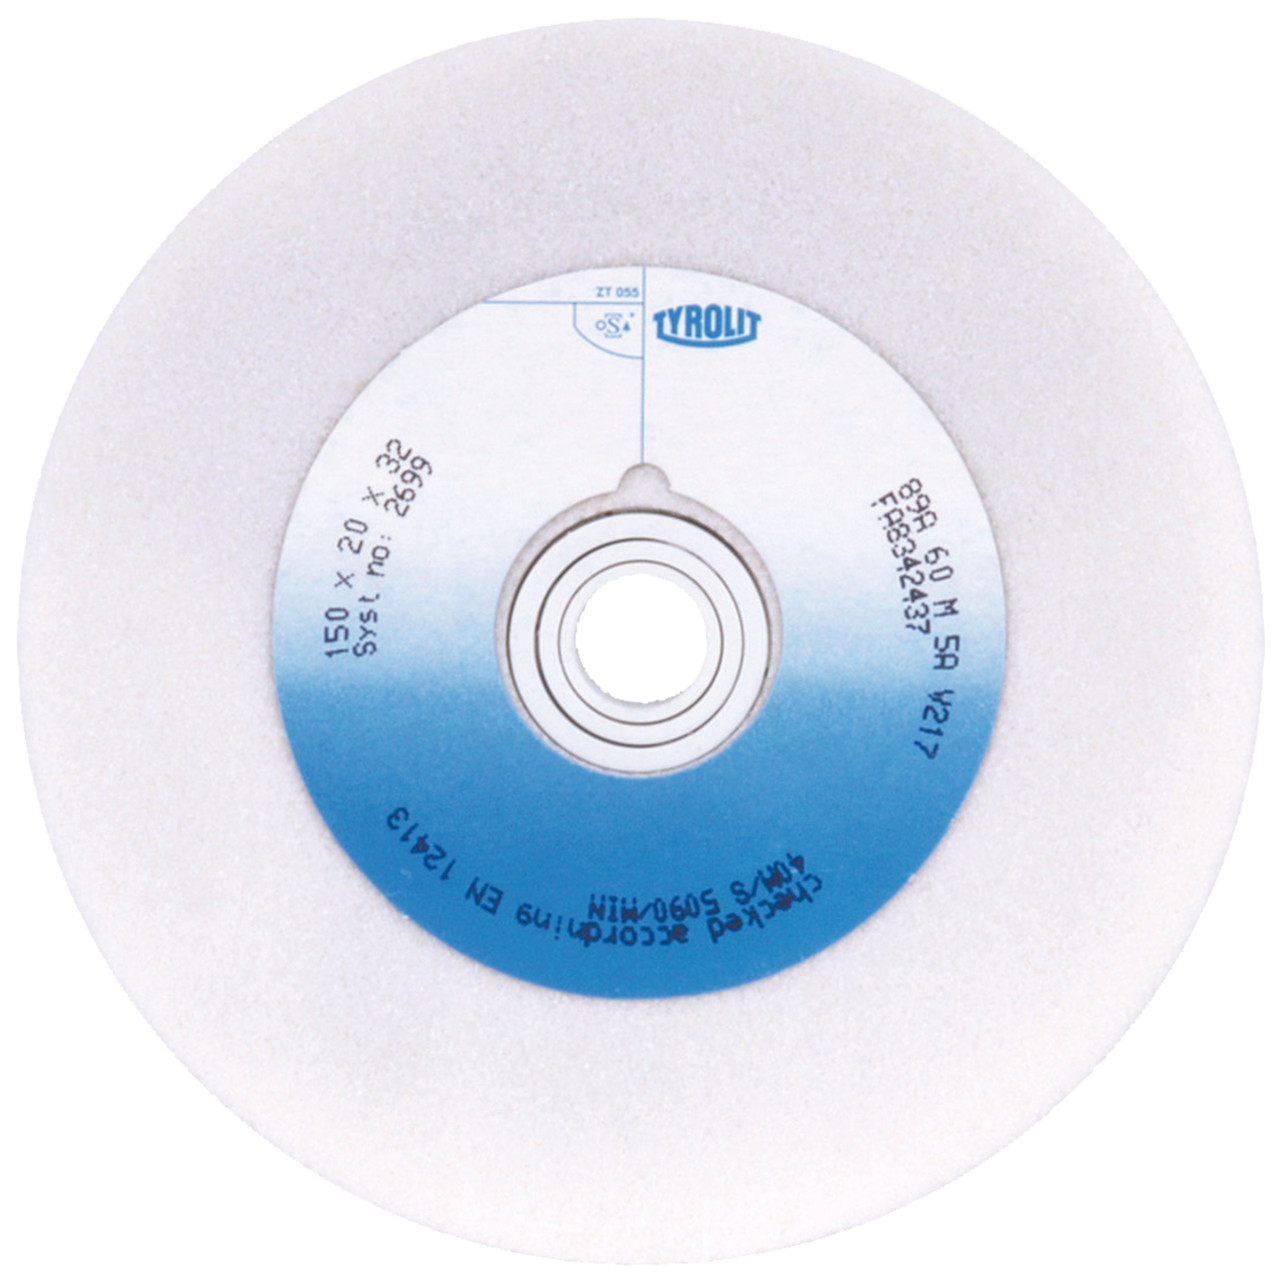 Tyrolit Conventional ceramic grinding discs DxDxH 300x32x127 For high-alloy steels and HSS, shape: 1, Art. 127554